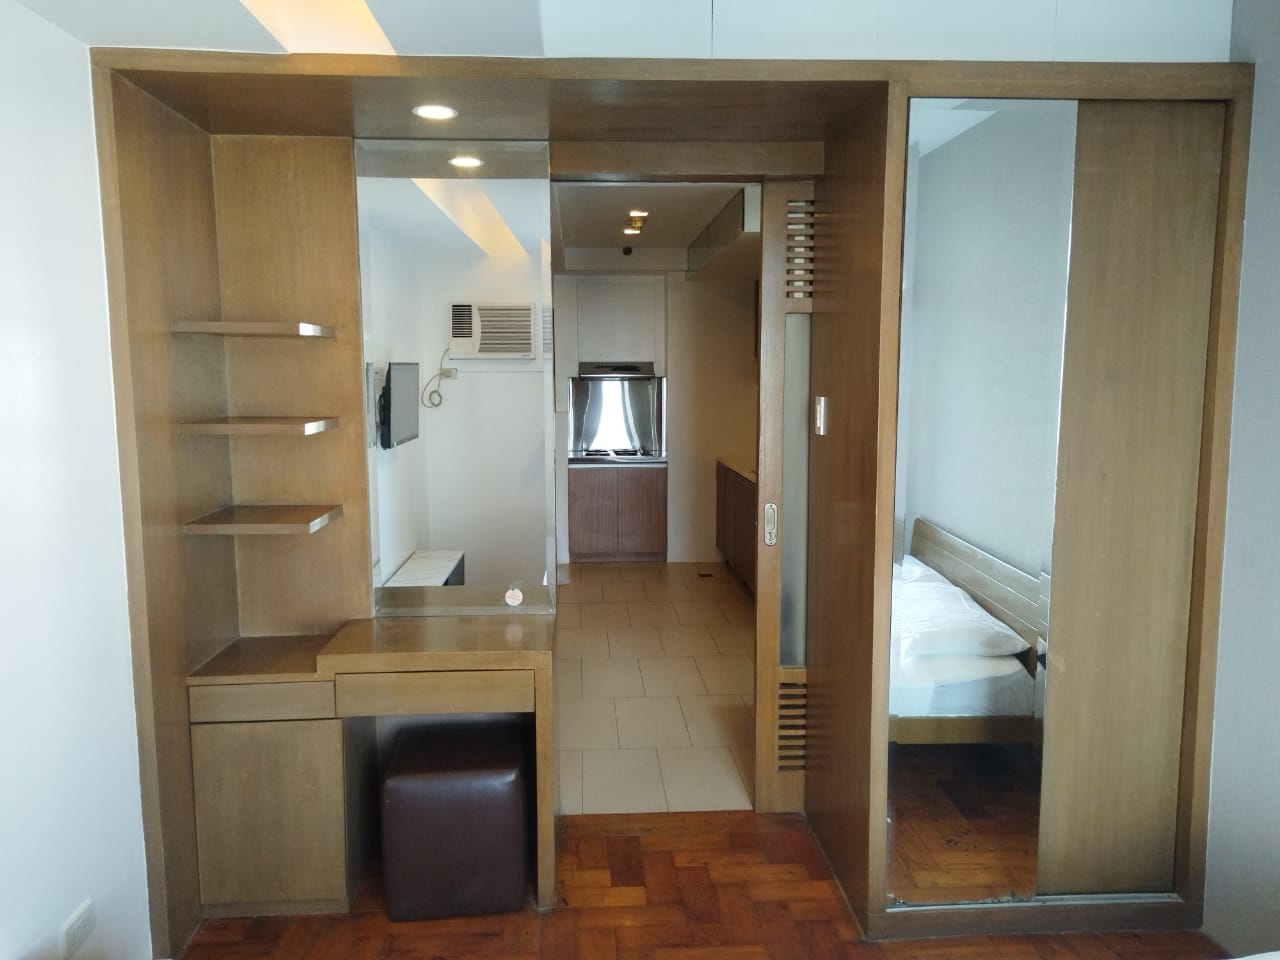 FOR SALE 1BR UNIT AT ANTEL SPA RESIDENCES MAKATI